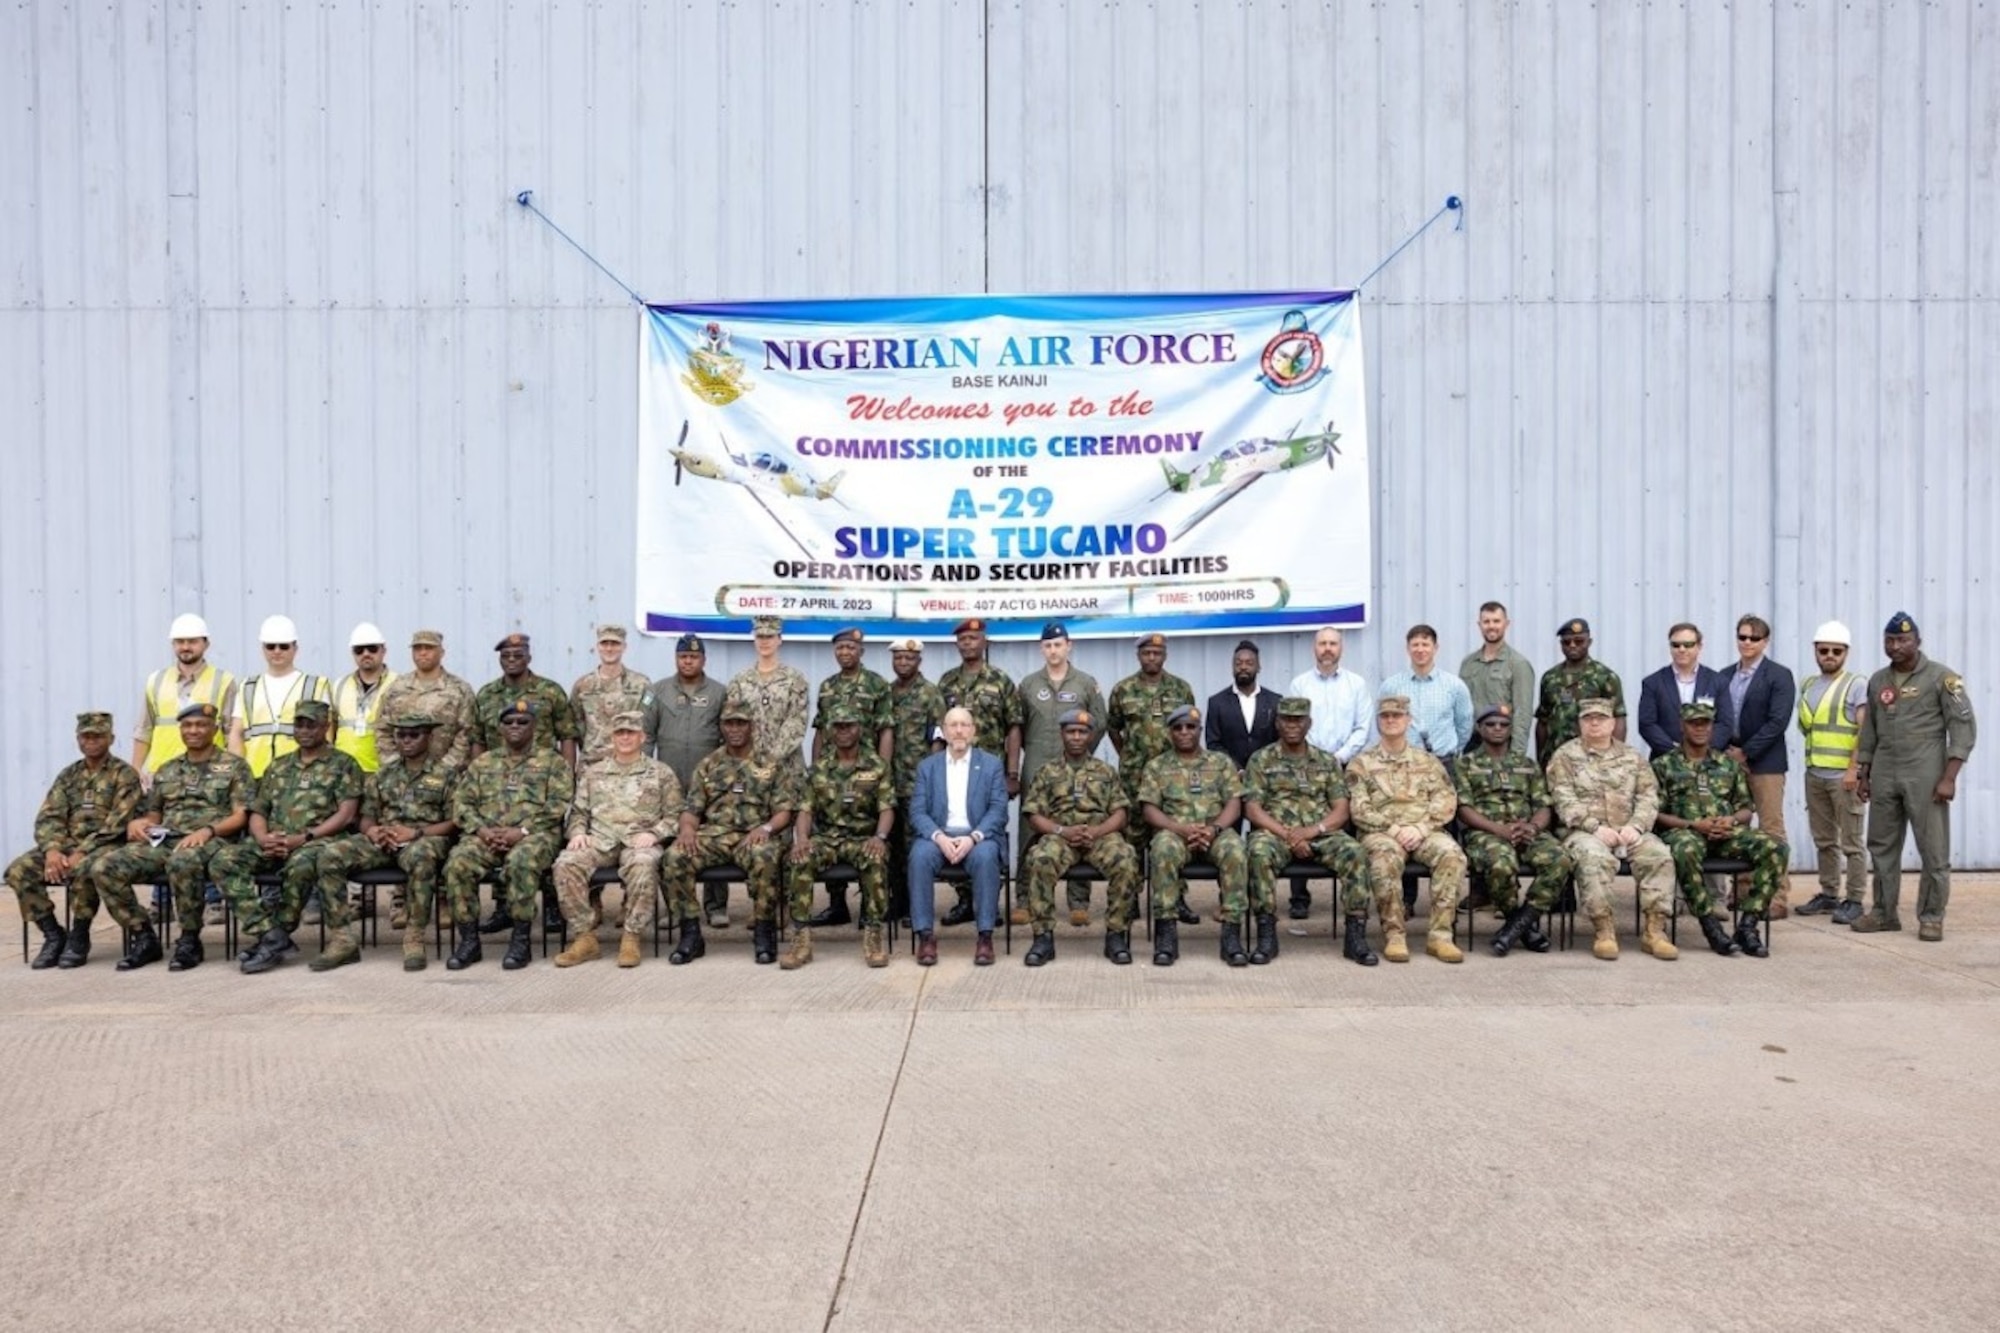 Officials representing the U.S. Embassy in Nigeria, U.S. Army Corps of Engineers, U.S. Air Force Life Cycle Management Center's Air Force Security Assistance and Cooperation Directorate, Nigerian Air Force, contractors and others pose for a picture at Kainji Air Force Base in Nigeria following ceremonies celebrating recently completed base infrastructure improvements there April 27, 2023. They participated in ribbon cutting ceremonies highlighting the completion of several construction projects supporting recently delivered A-29 Super Tucano aircraft. The construction was part of the historic $500 million U.S. foreign military sale to Nigeria, which also includes the delivery of the 12 A-29 Super Tucano aircraft, munitions, and training. (U.S. Embassy in Nigeria photo by Olaoluwa Aworinde)